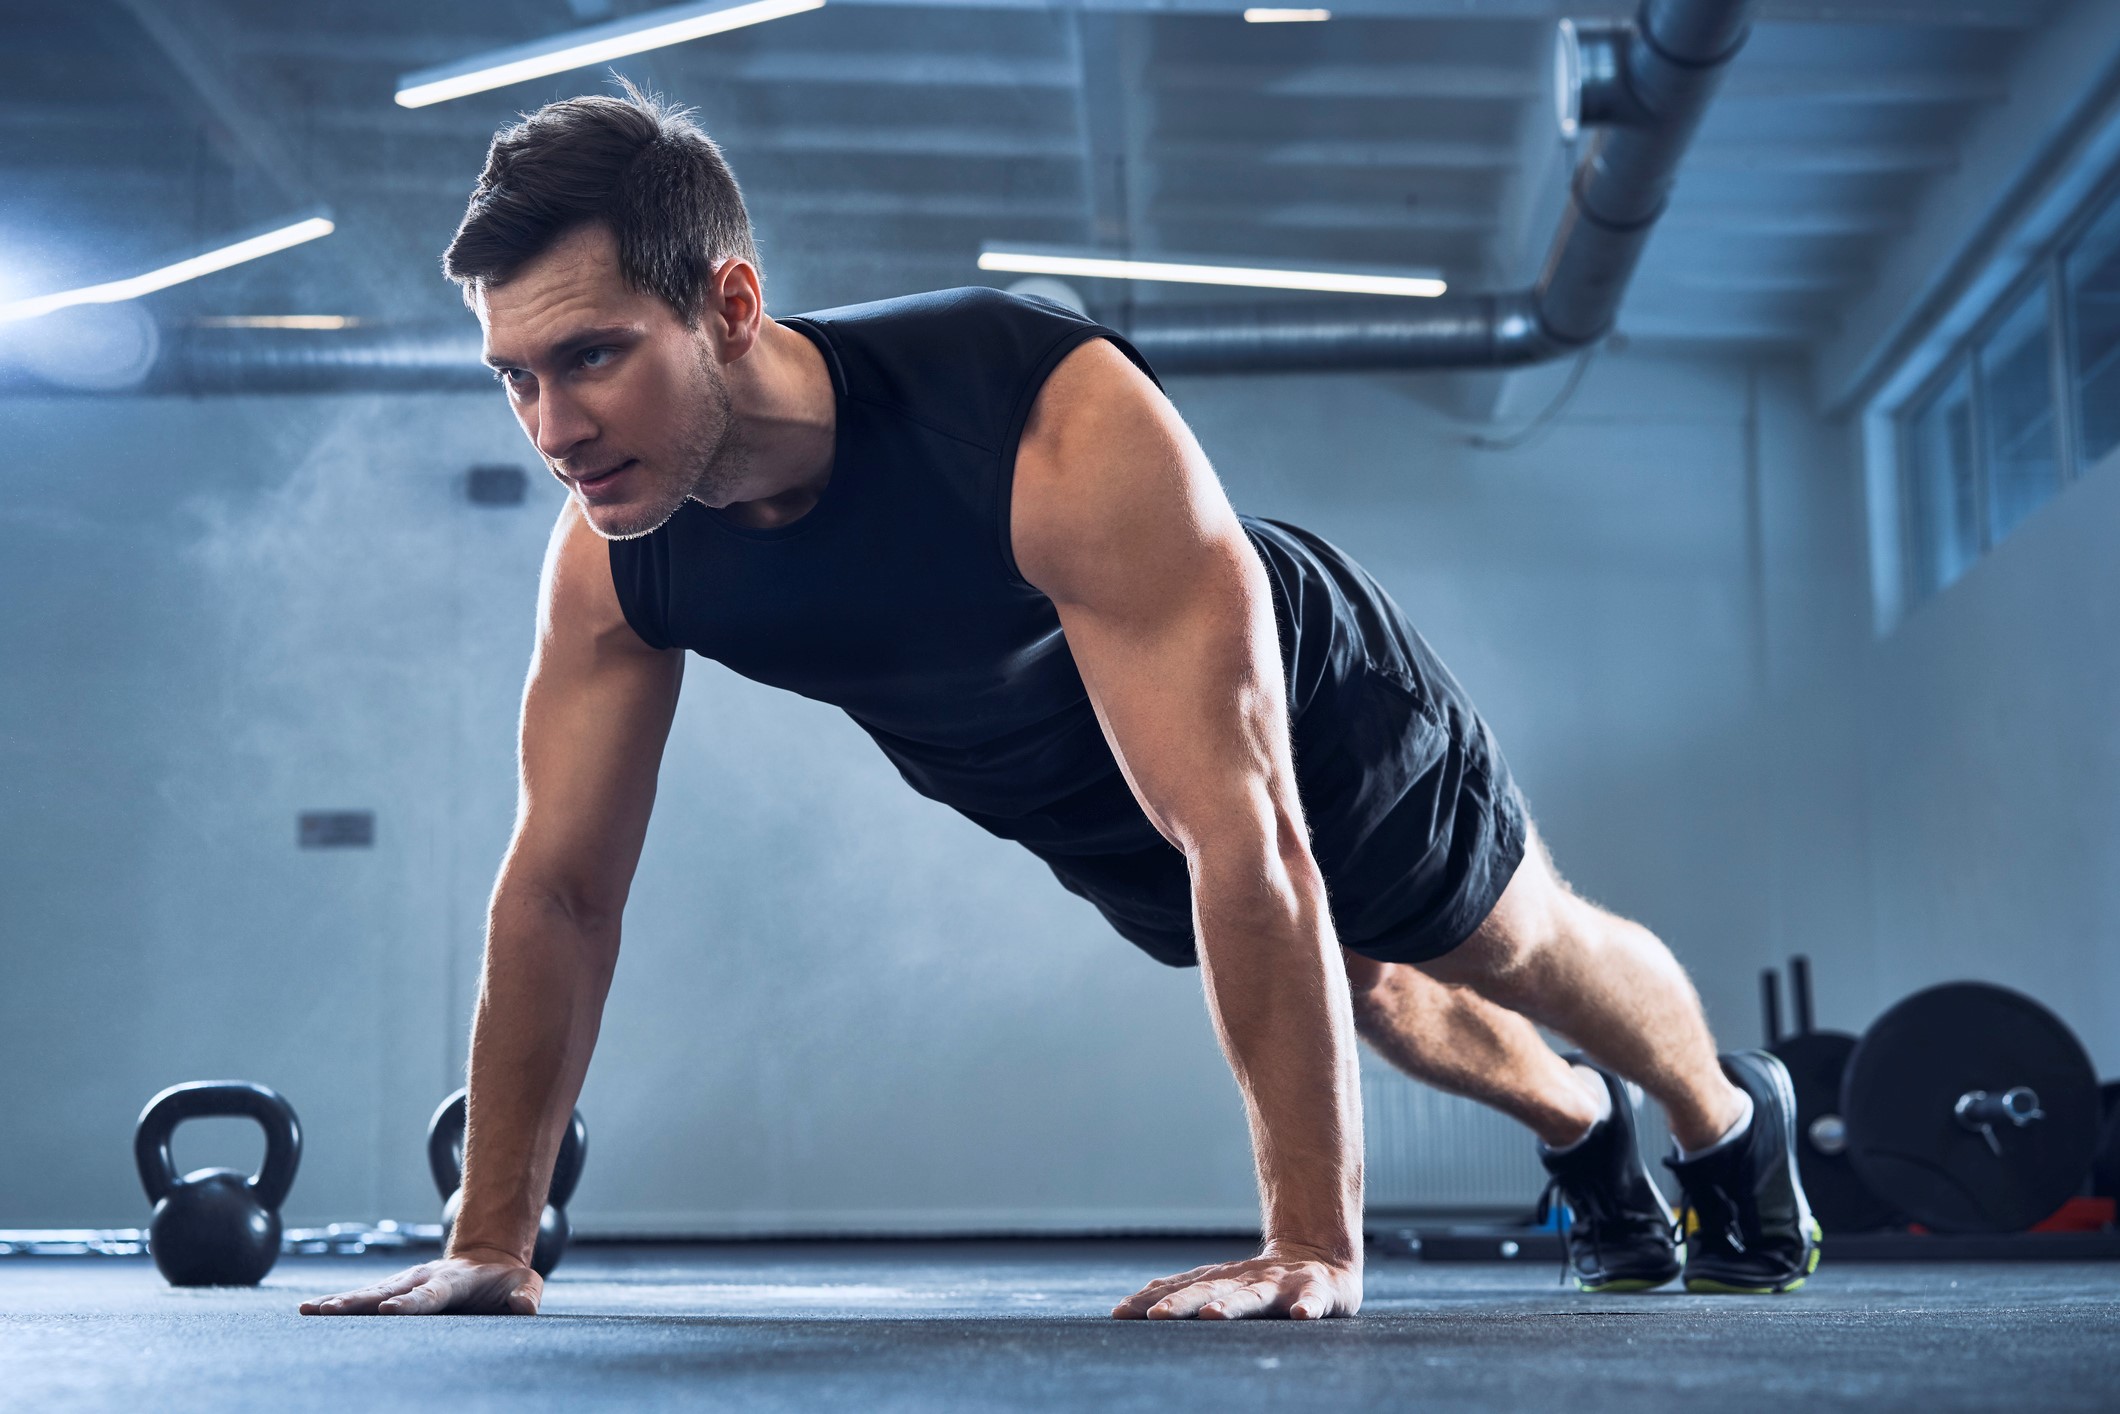 Push Up Power: How To Improve Your Upper Body Strength